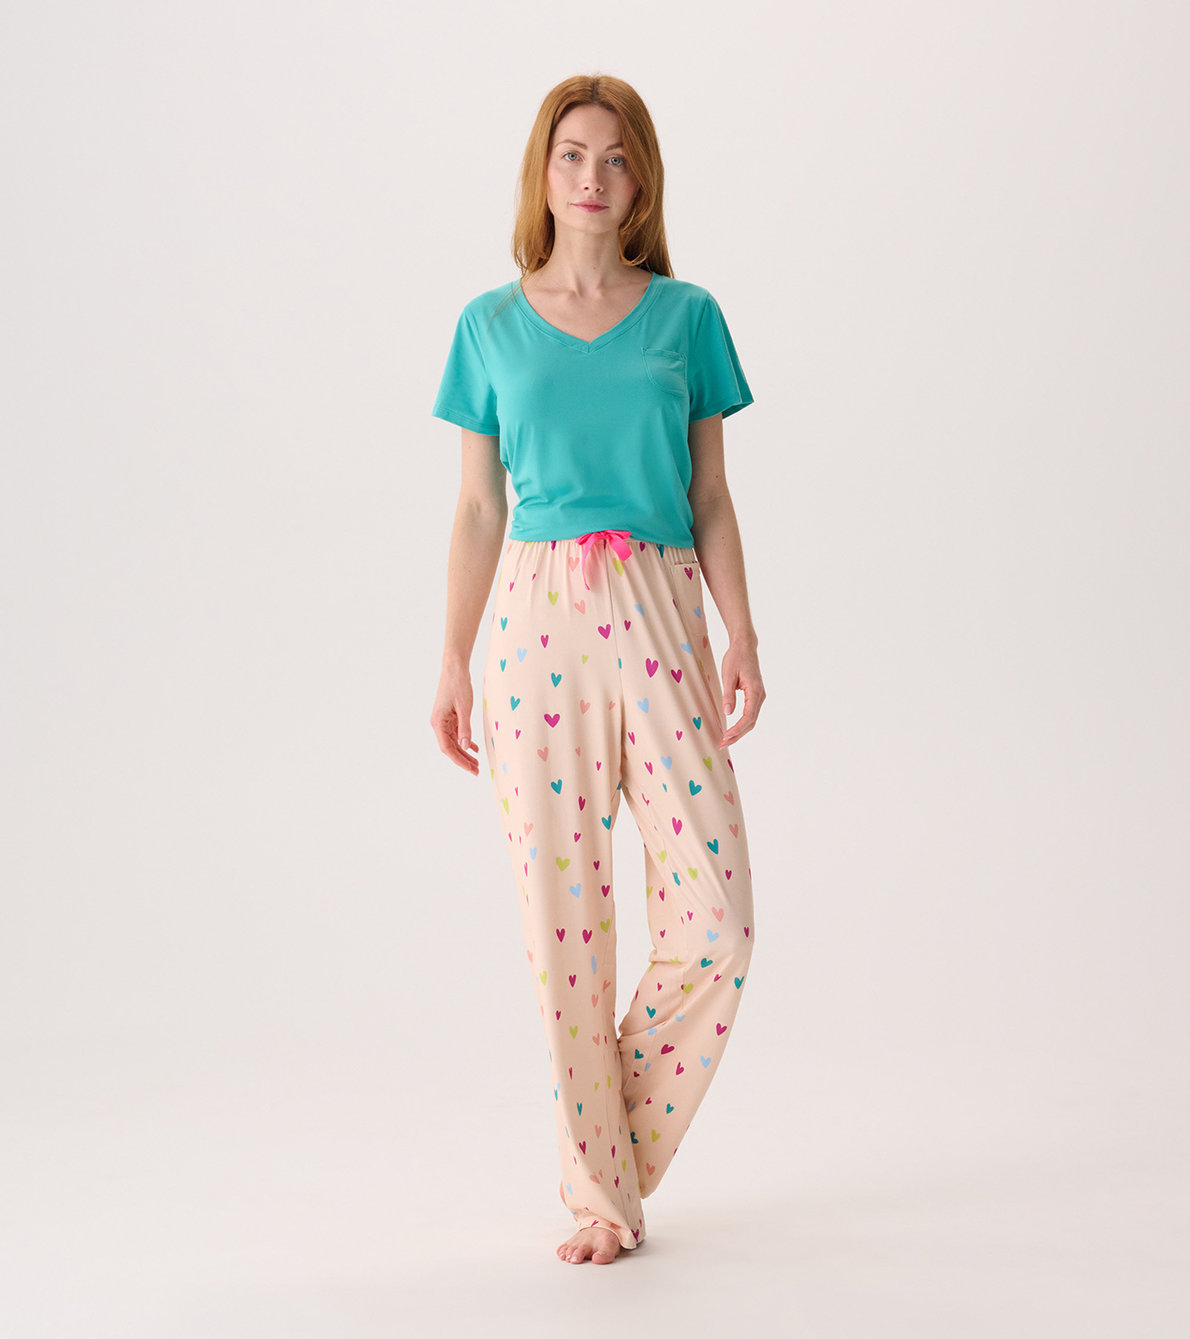 View larger image of Capelton Road Women's Jelly Bean Hearts T-Shirt and Pants